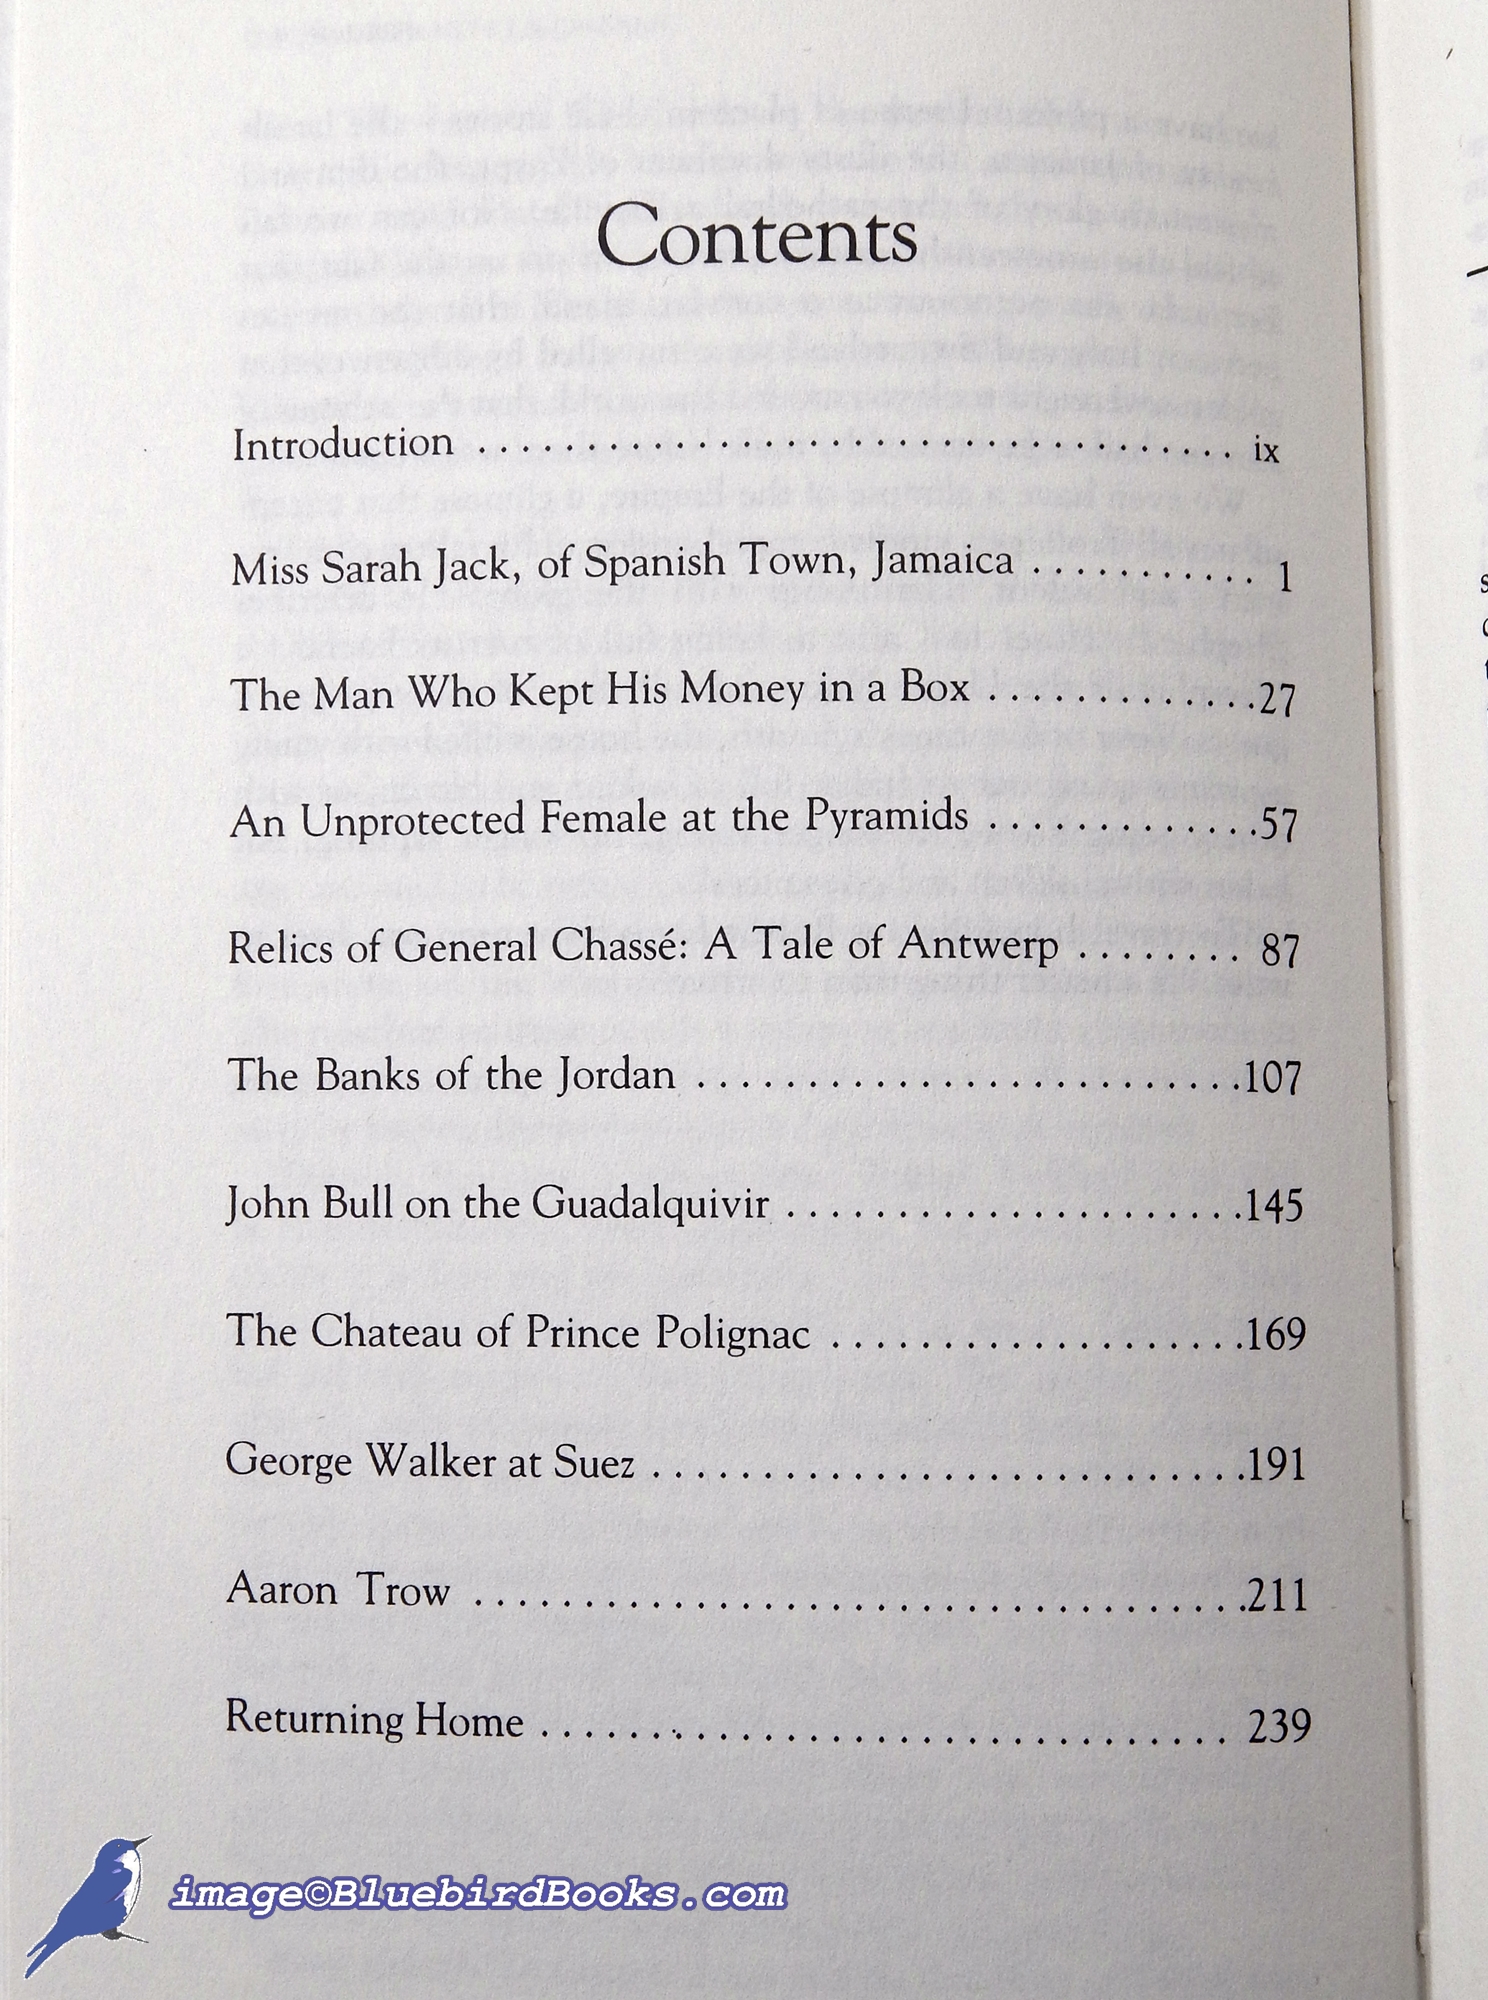 TROLLOPE, ANTHONY - Tourists and Colonials: Volume 3 of the Complete Short Stories of Anthony Trollope